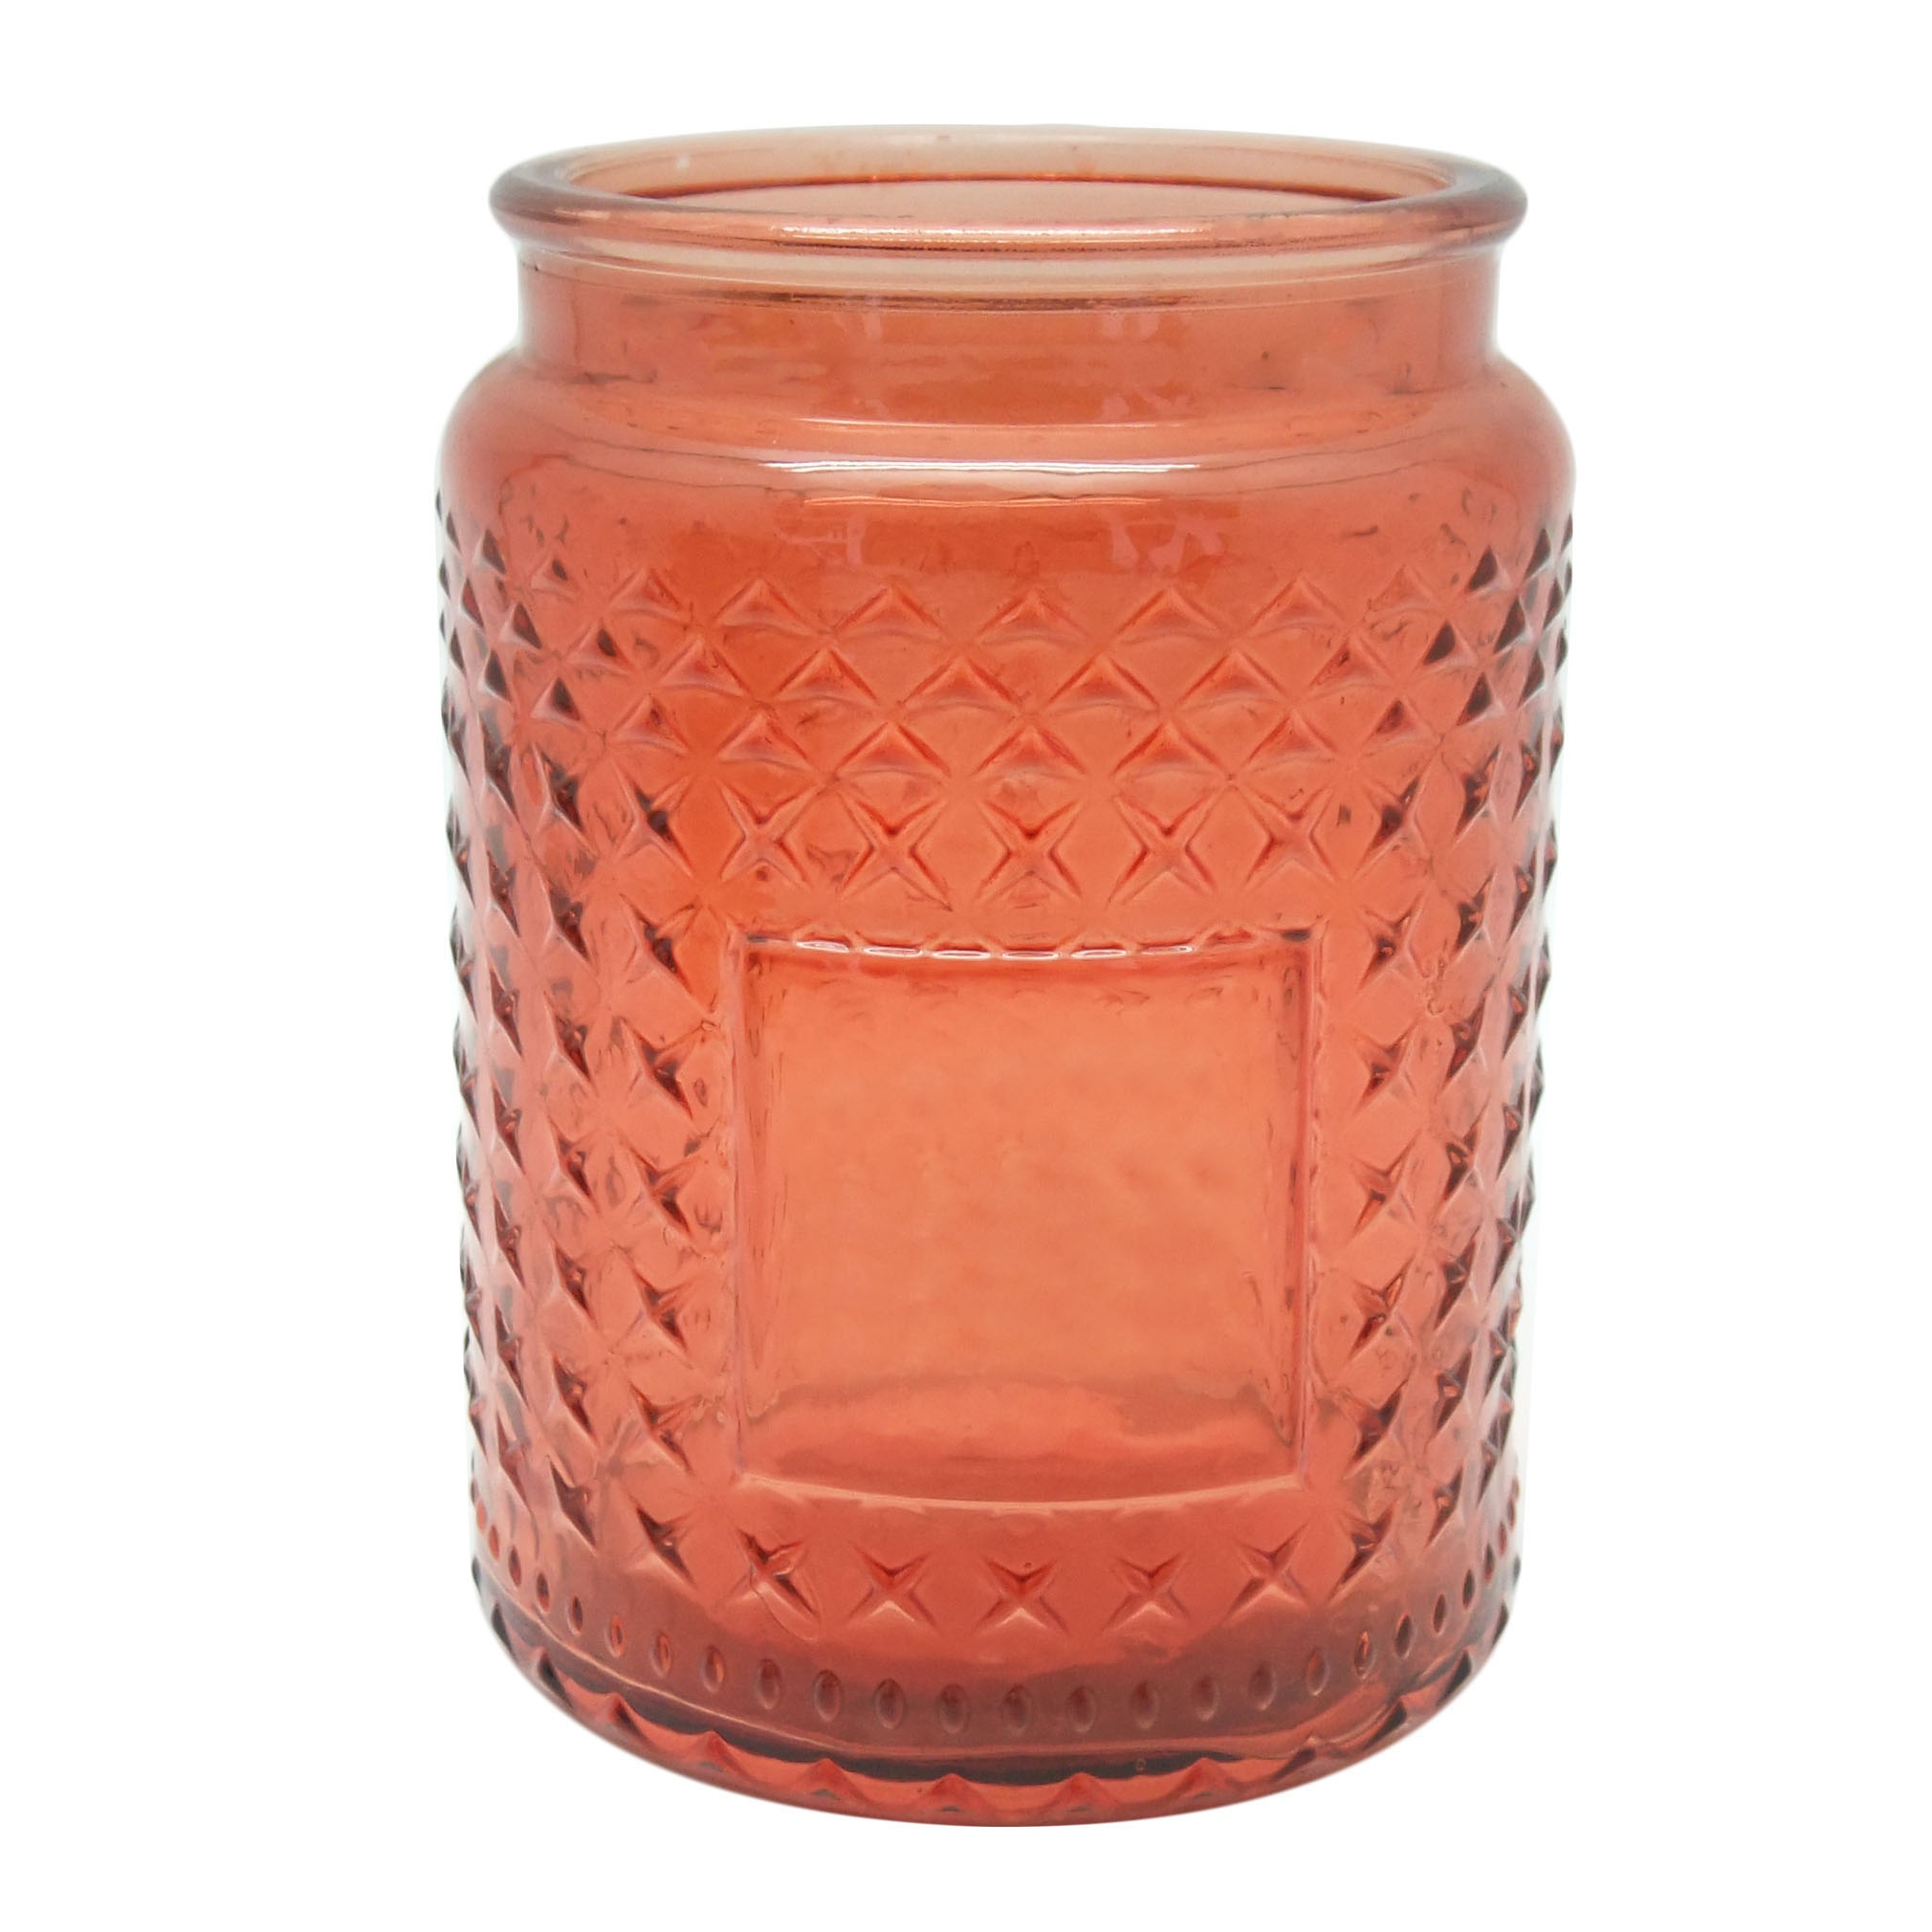 Large Embossed Glass Jar Candle 17oz Unique Candle Jars With Screw Top  Metal Lids Candle Holders 18oz Stars Facets, High Quality Large Glass Jar  With Screw Top Lid,Large Embossed Glass Jar,Candle Jar